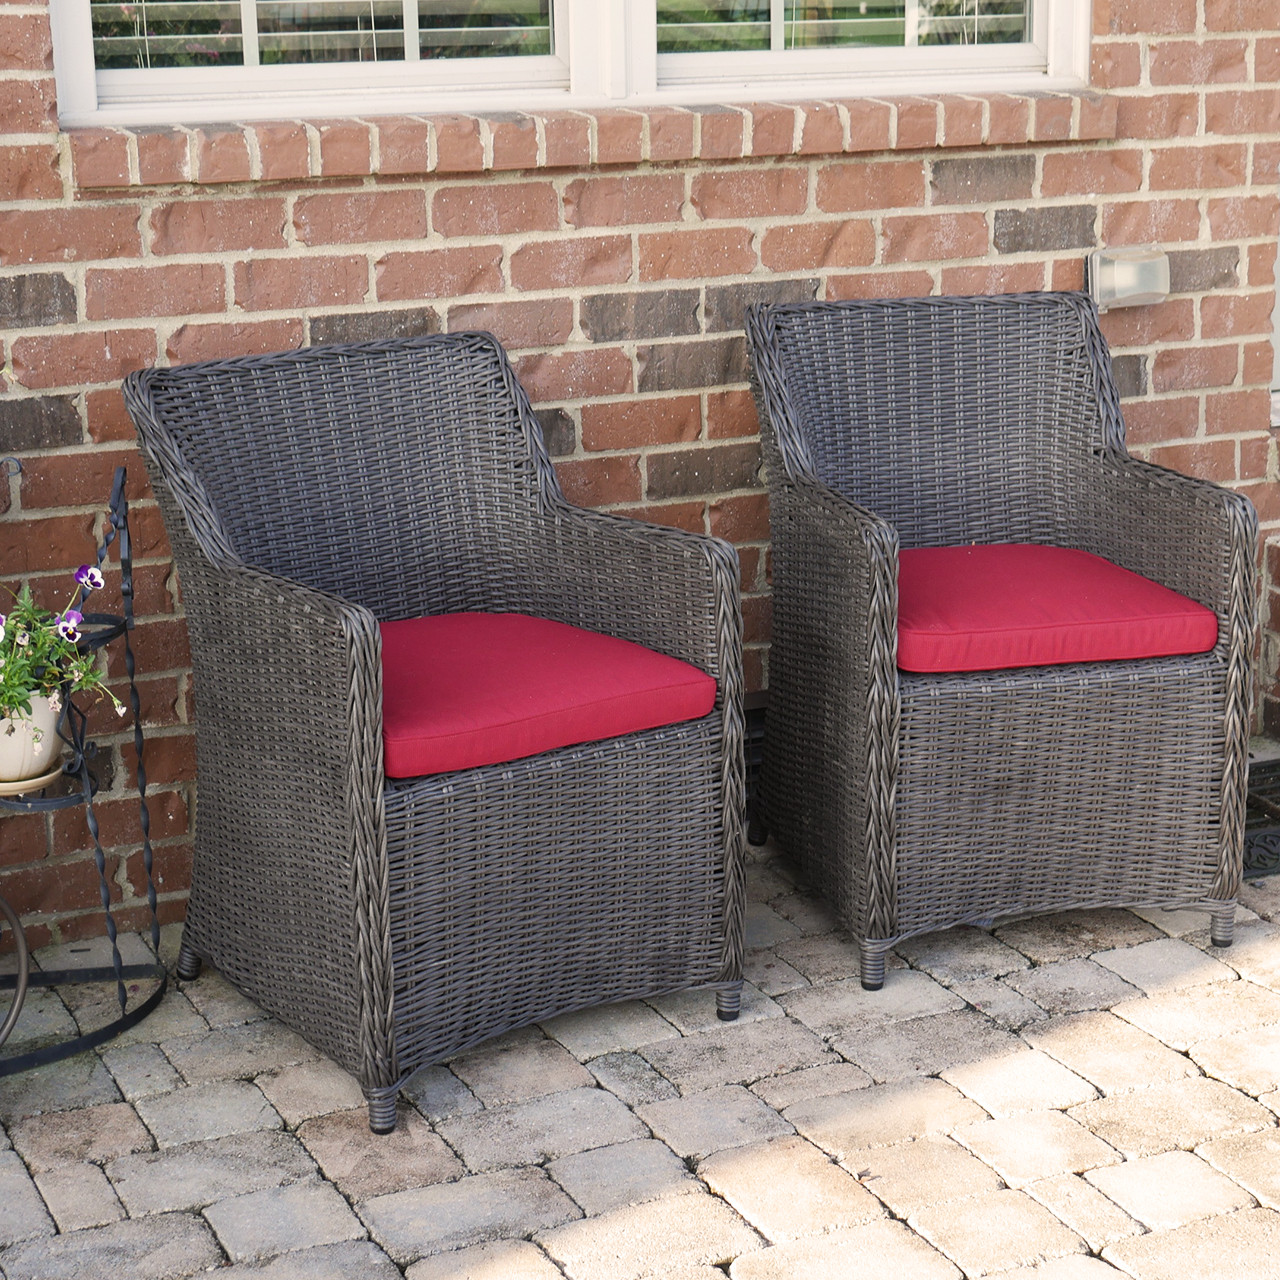 Sea Island Wicker Patio Lounge Chair Set With Red Cushion Set of 2